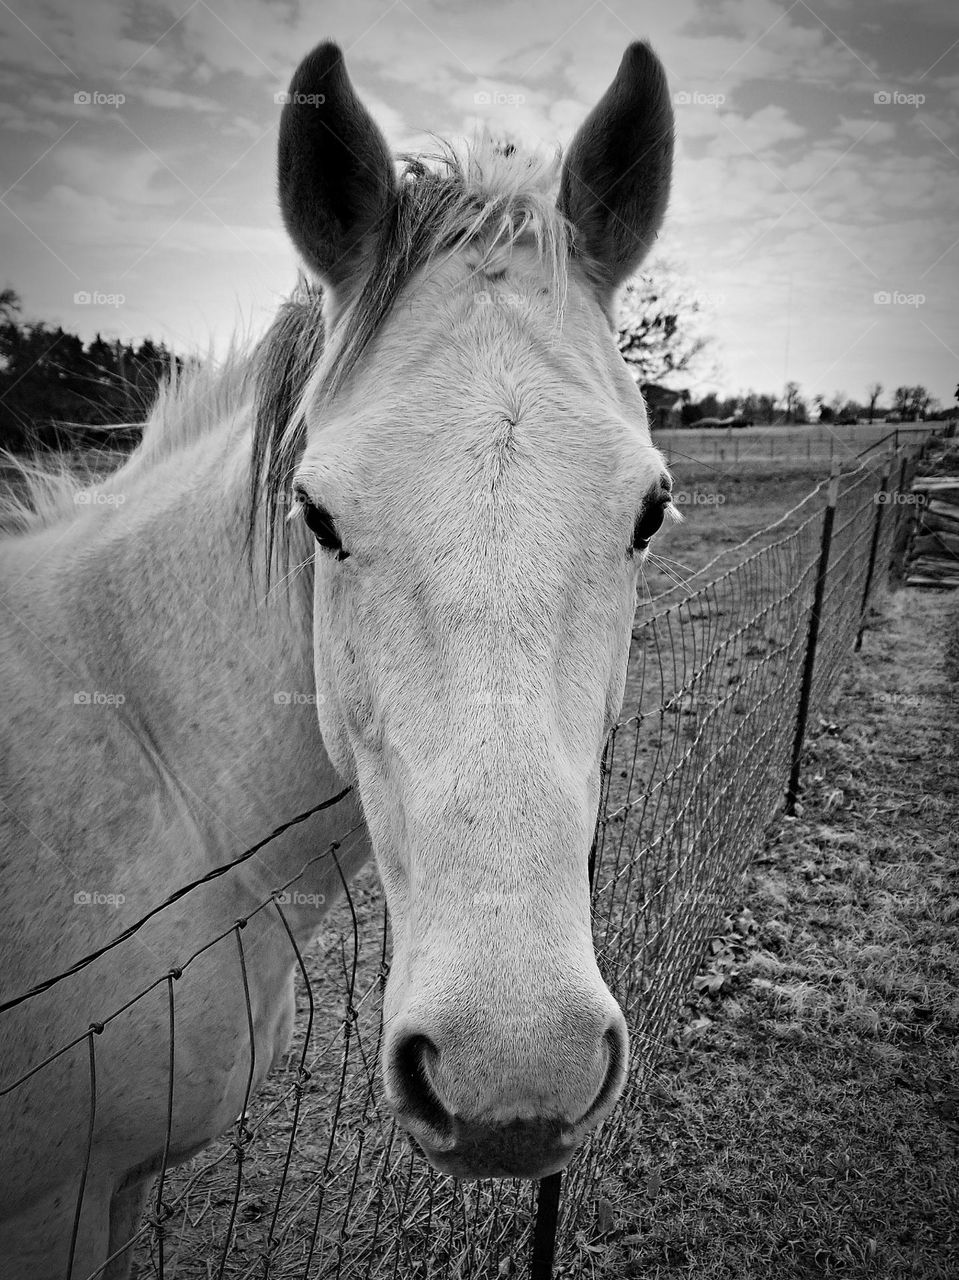 Gray Horse Looking Over a Fence on a cloudy winter day in black & white